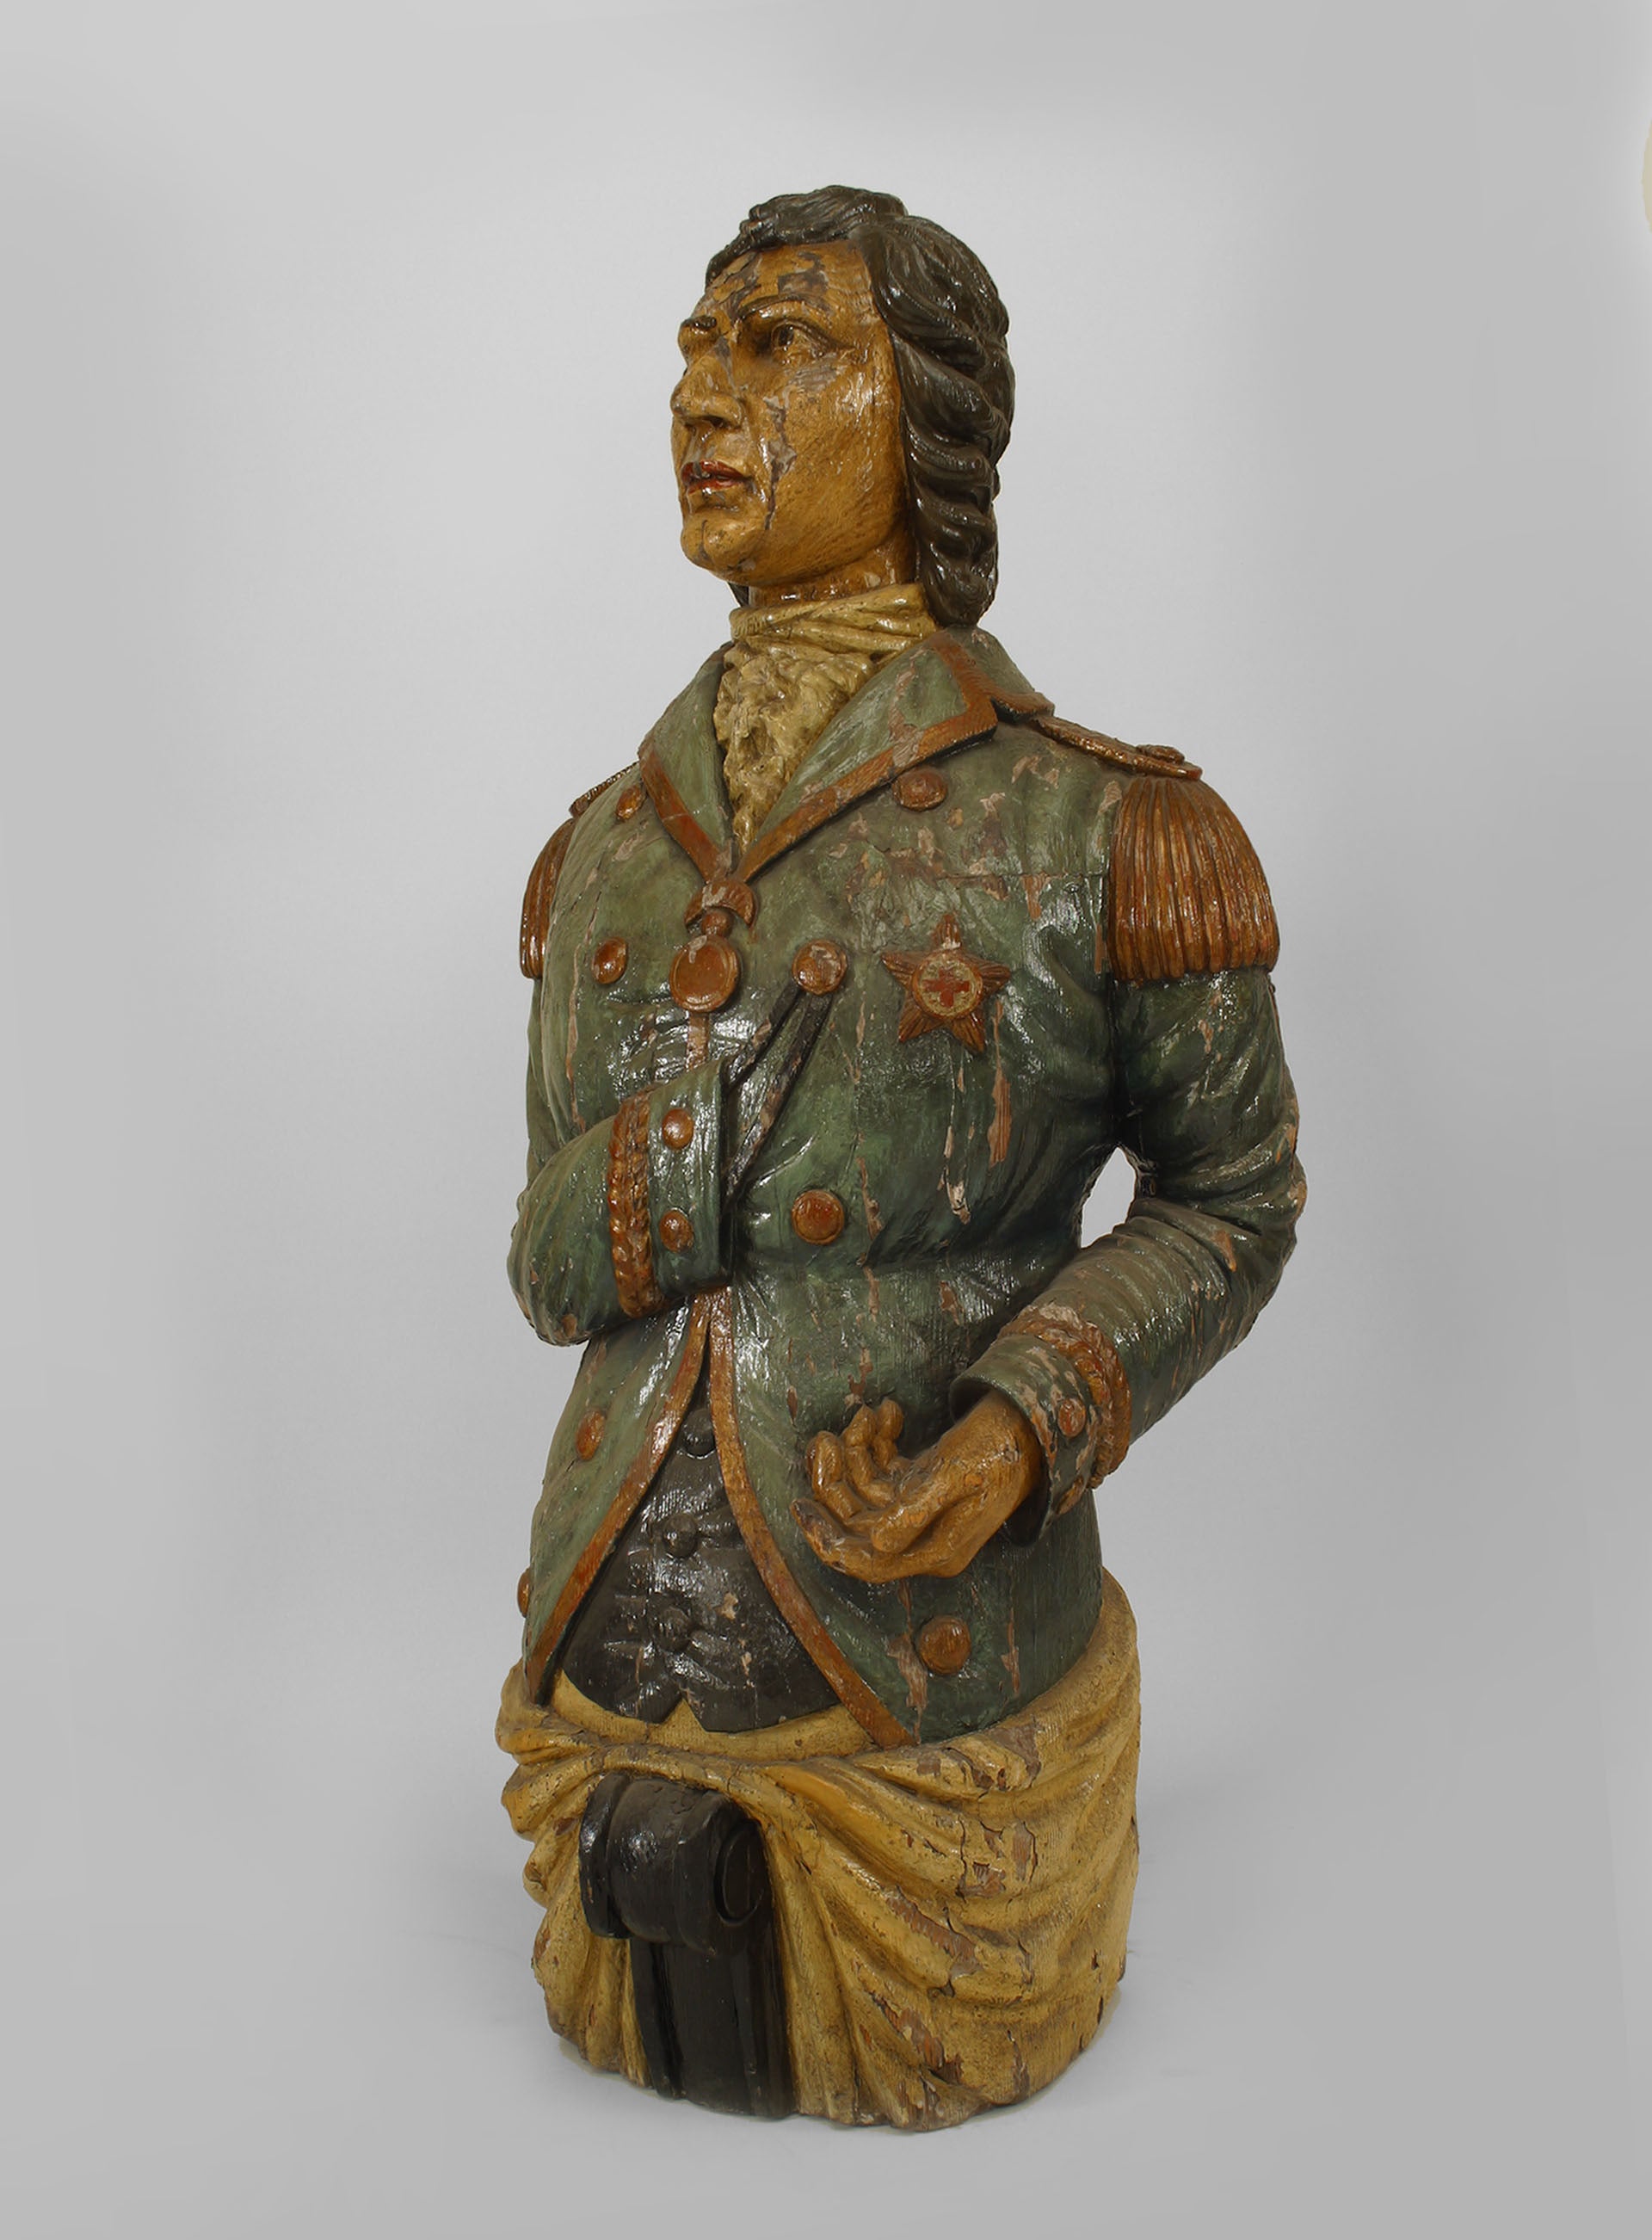 19th century English carved wooden polychrome large ship figurehead of Lord Nelson.